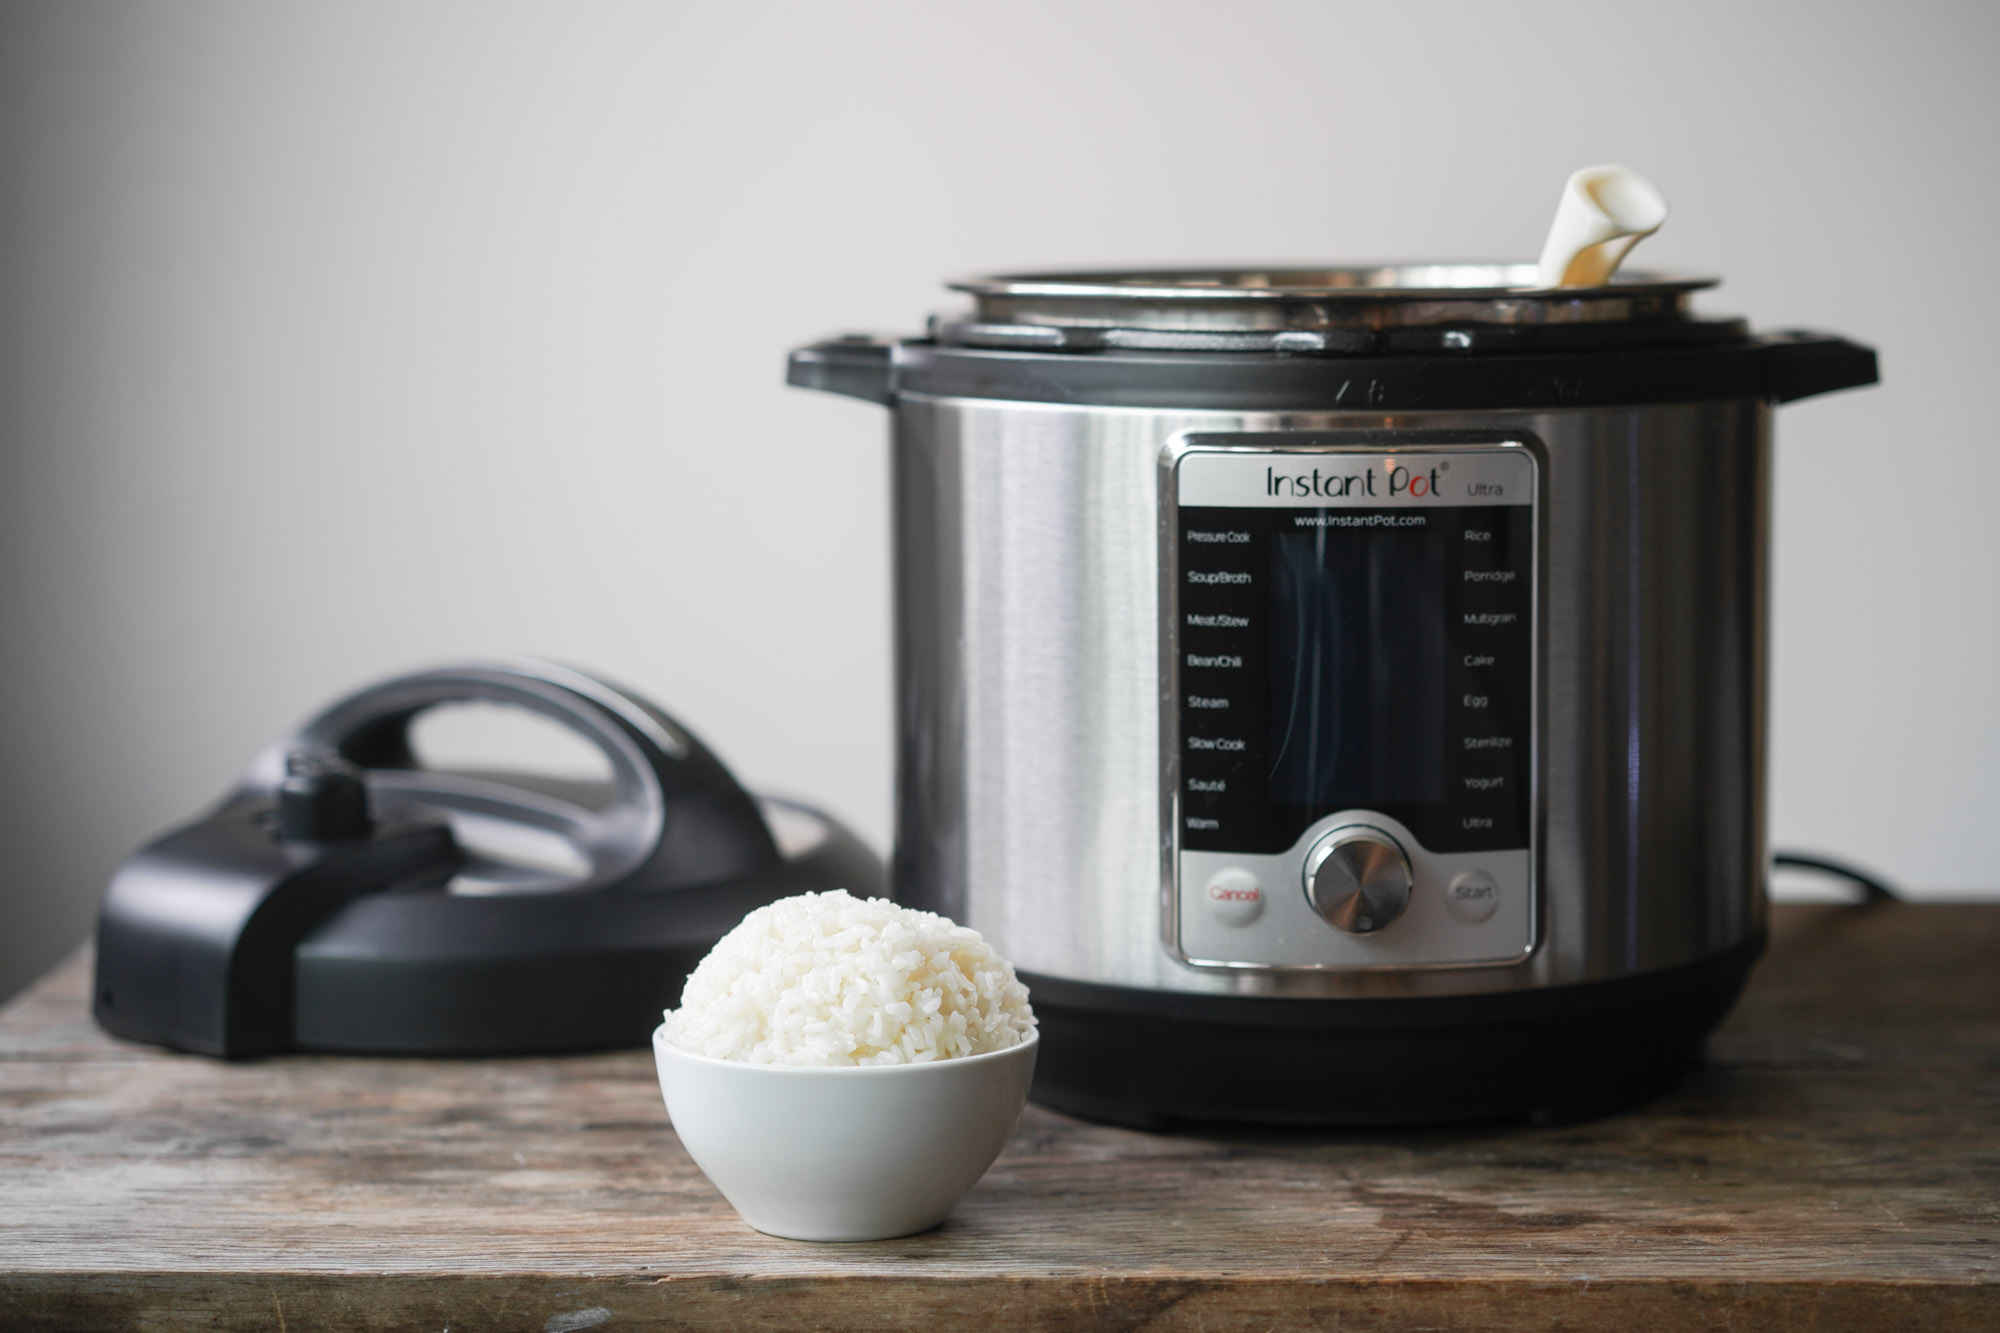 https://www.hungryhuy.com/wp-content/uploads/instant-pot-and-rice.jpg